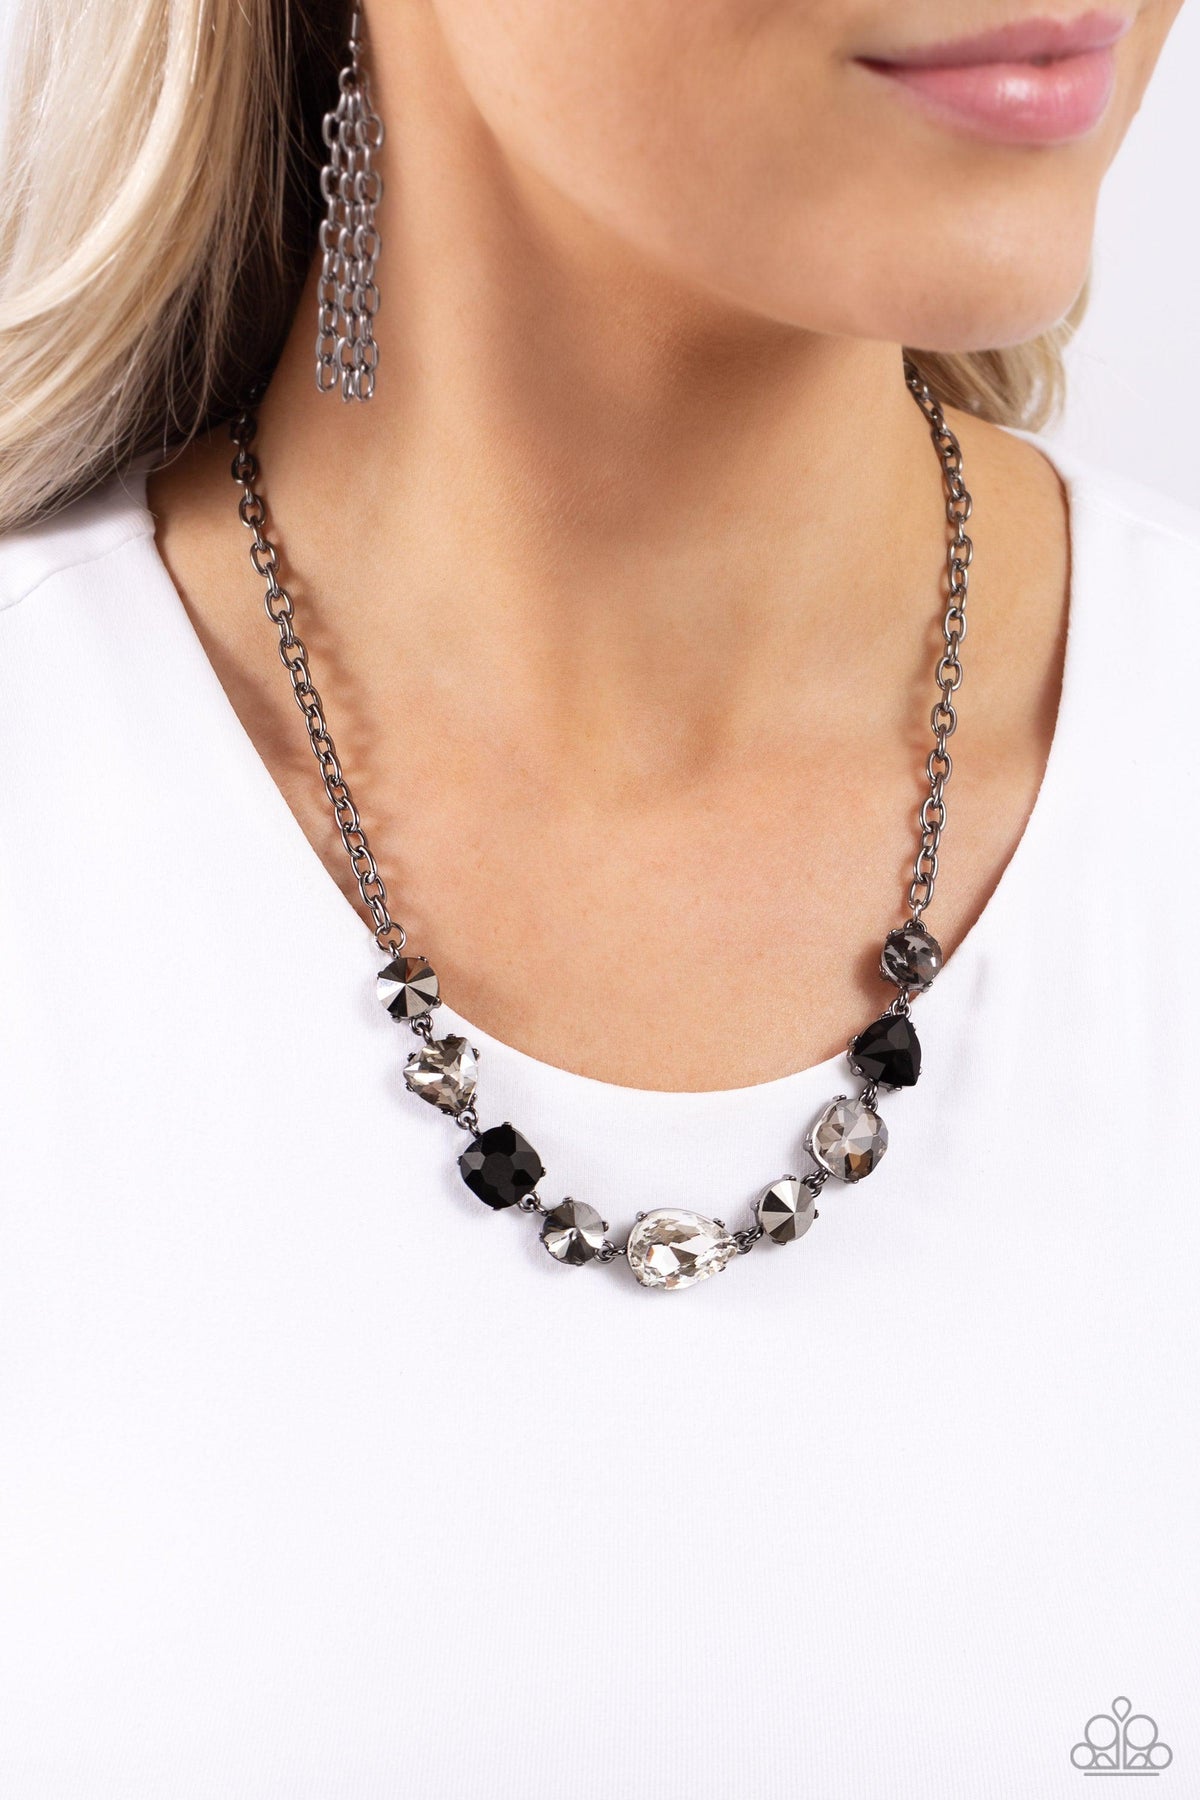 Emphatic Edge Black &amp; White Gem Necklace - Paparazzi Accessories-on model - CarasShop.com - $5 Jewelry by Cara Jewels